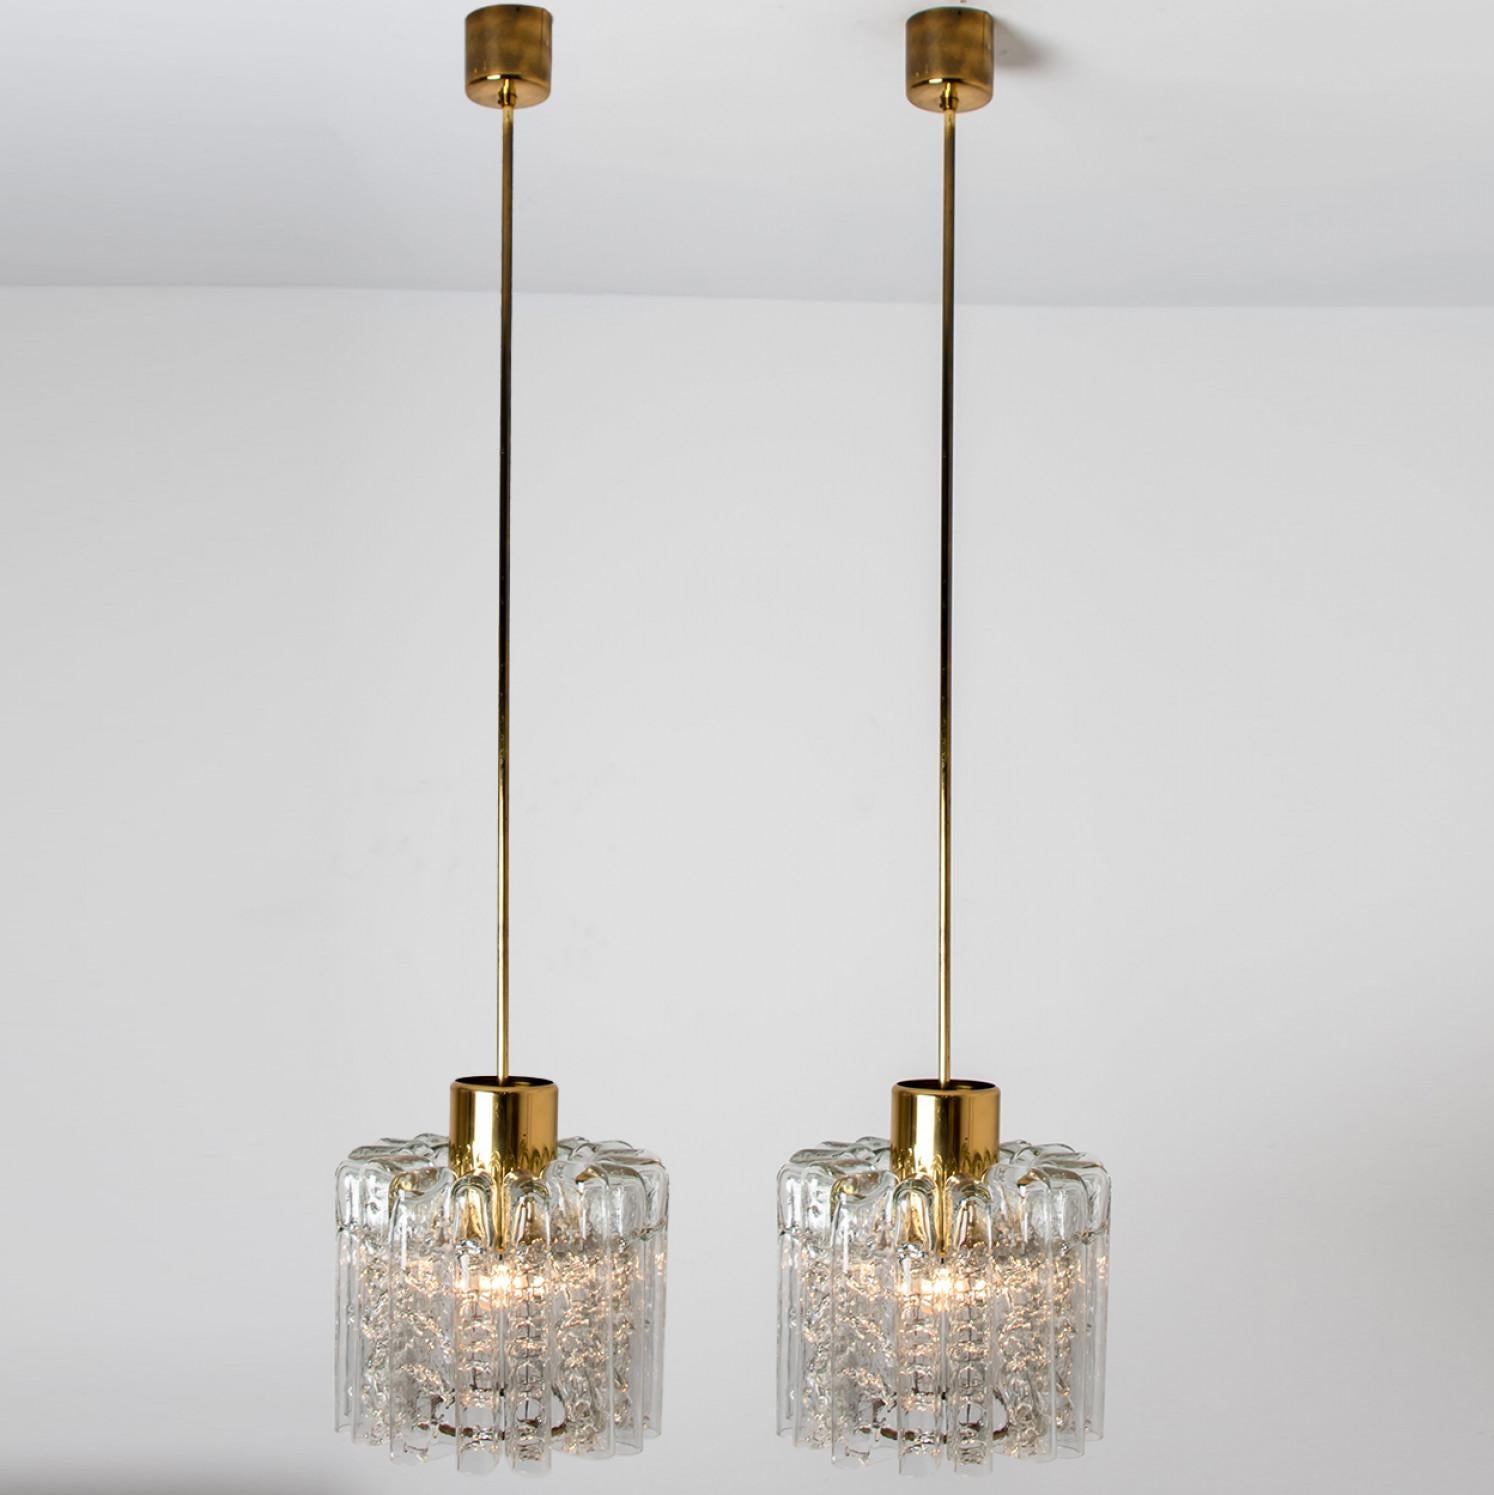 1 of the 2 Round Textured Clear Glass Doria Pendant Lamp, 1960s For Sale 8